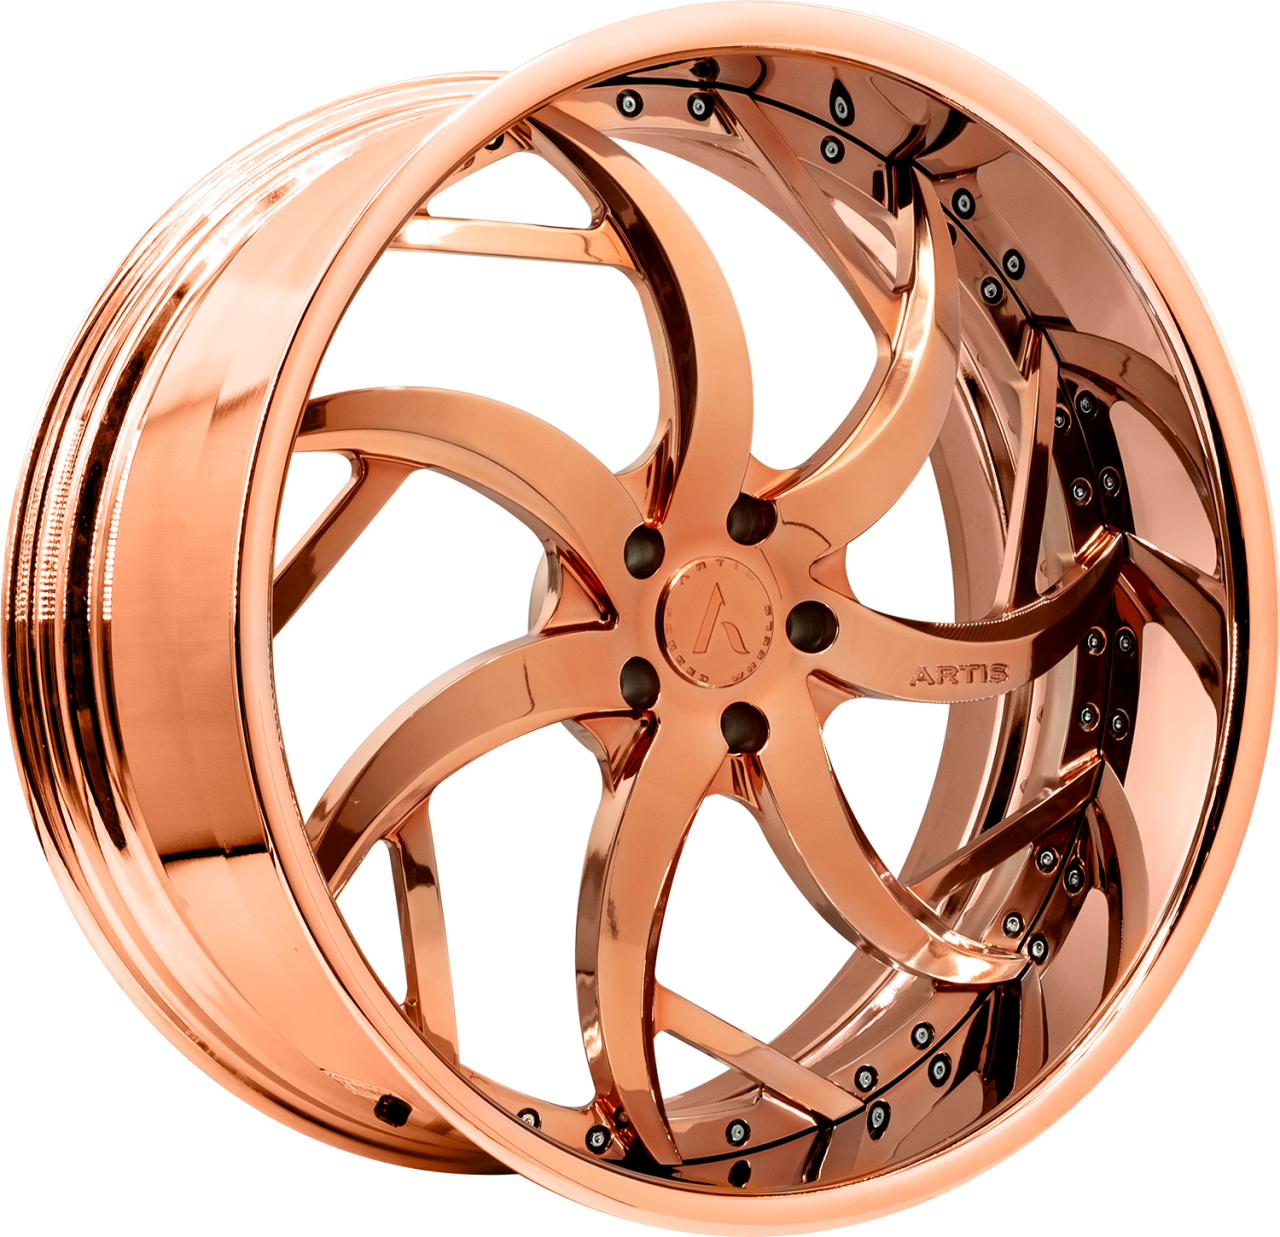 Artis Forged Sin City wheel with Rose Gold finish